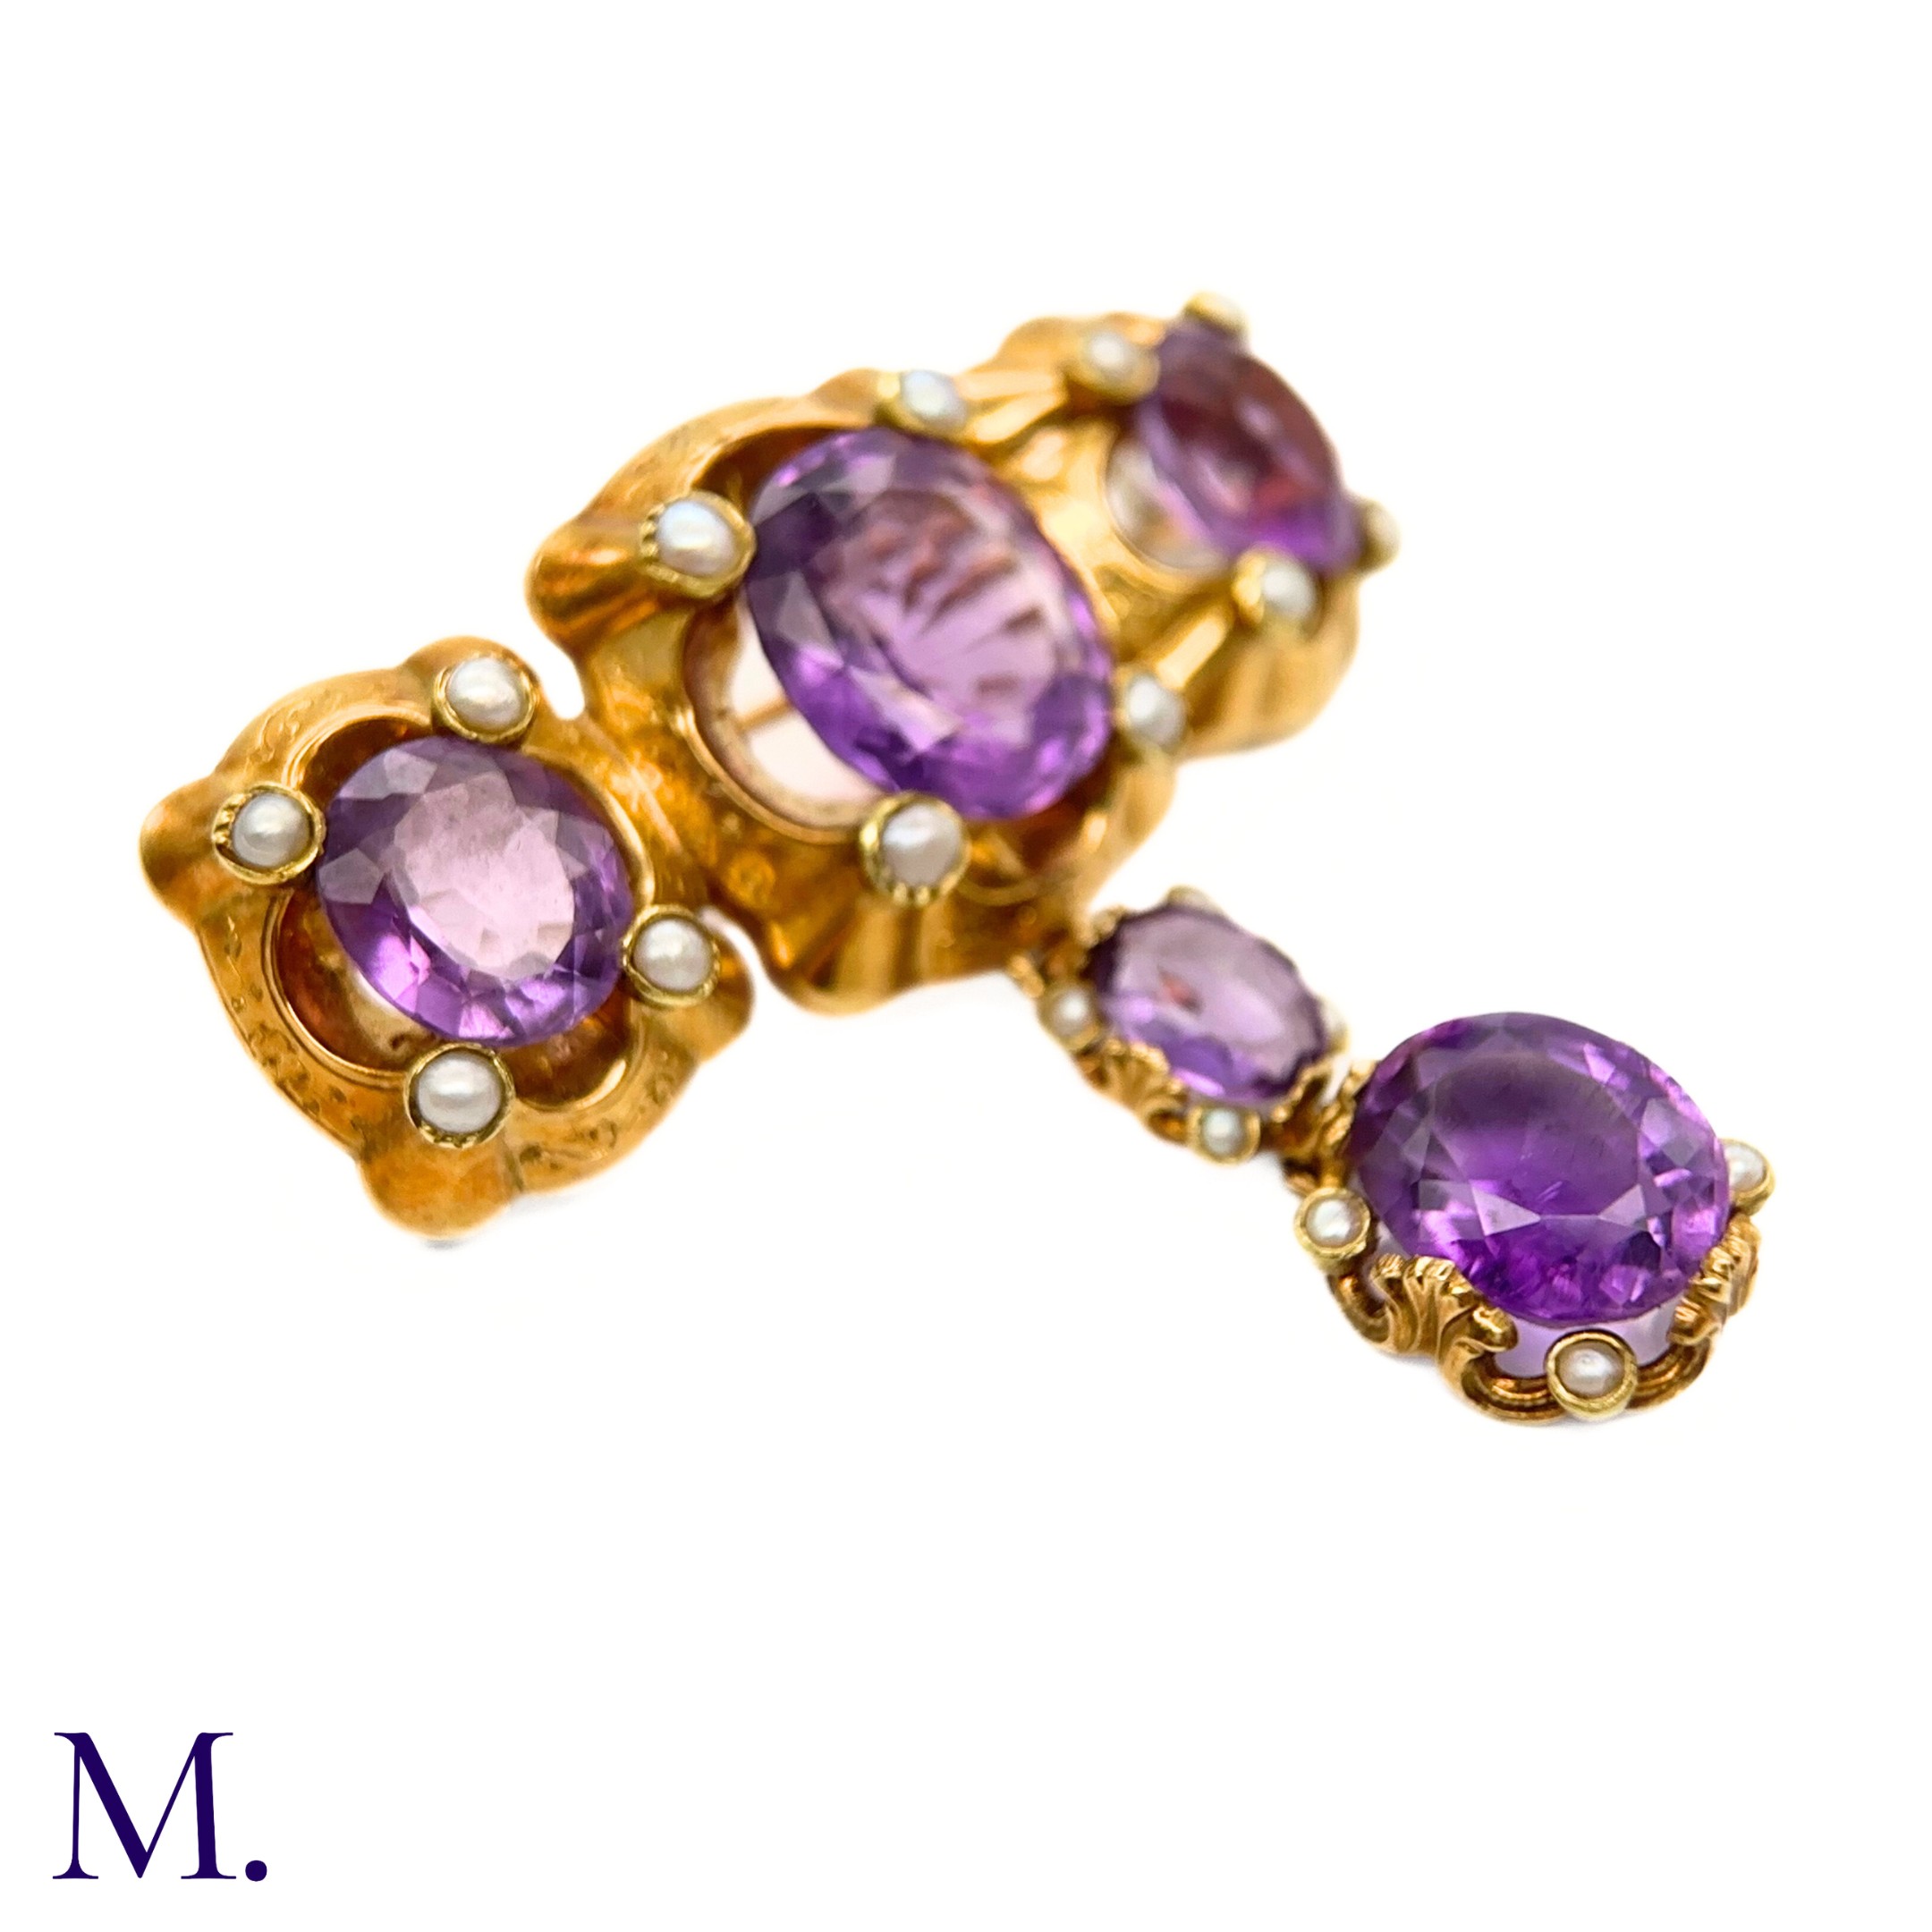 An Antique Amethyst and Pearl Drop Brooch - Image 3 of 6